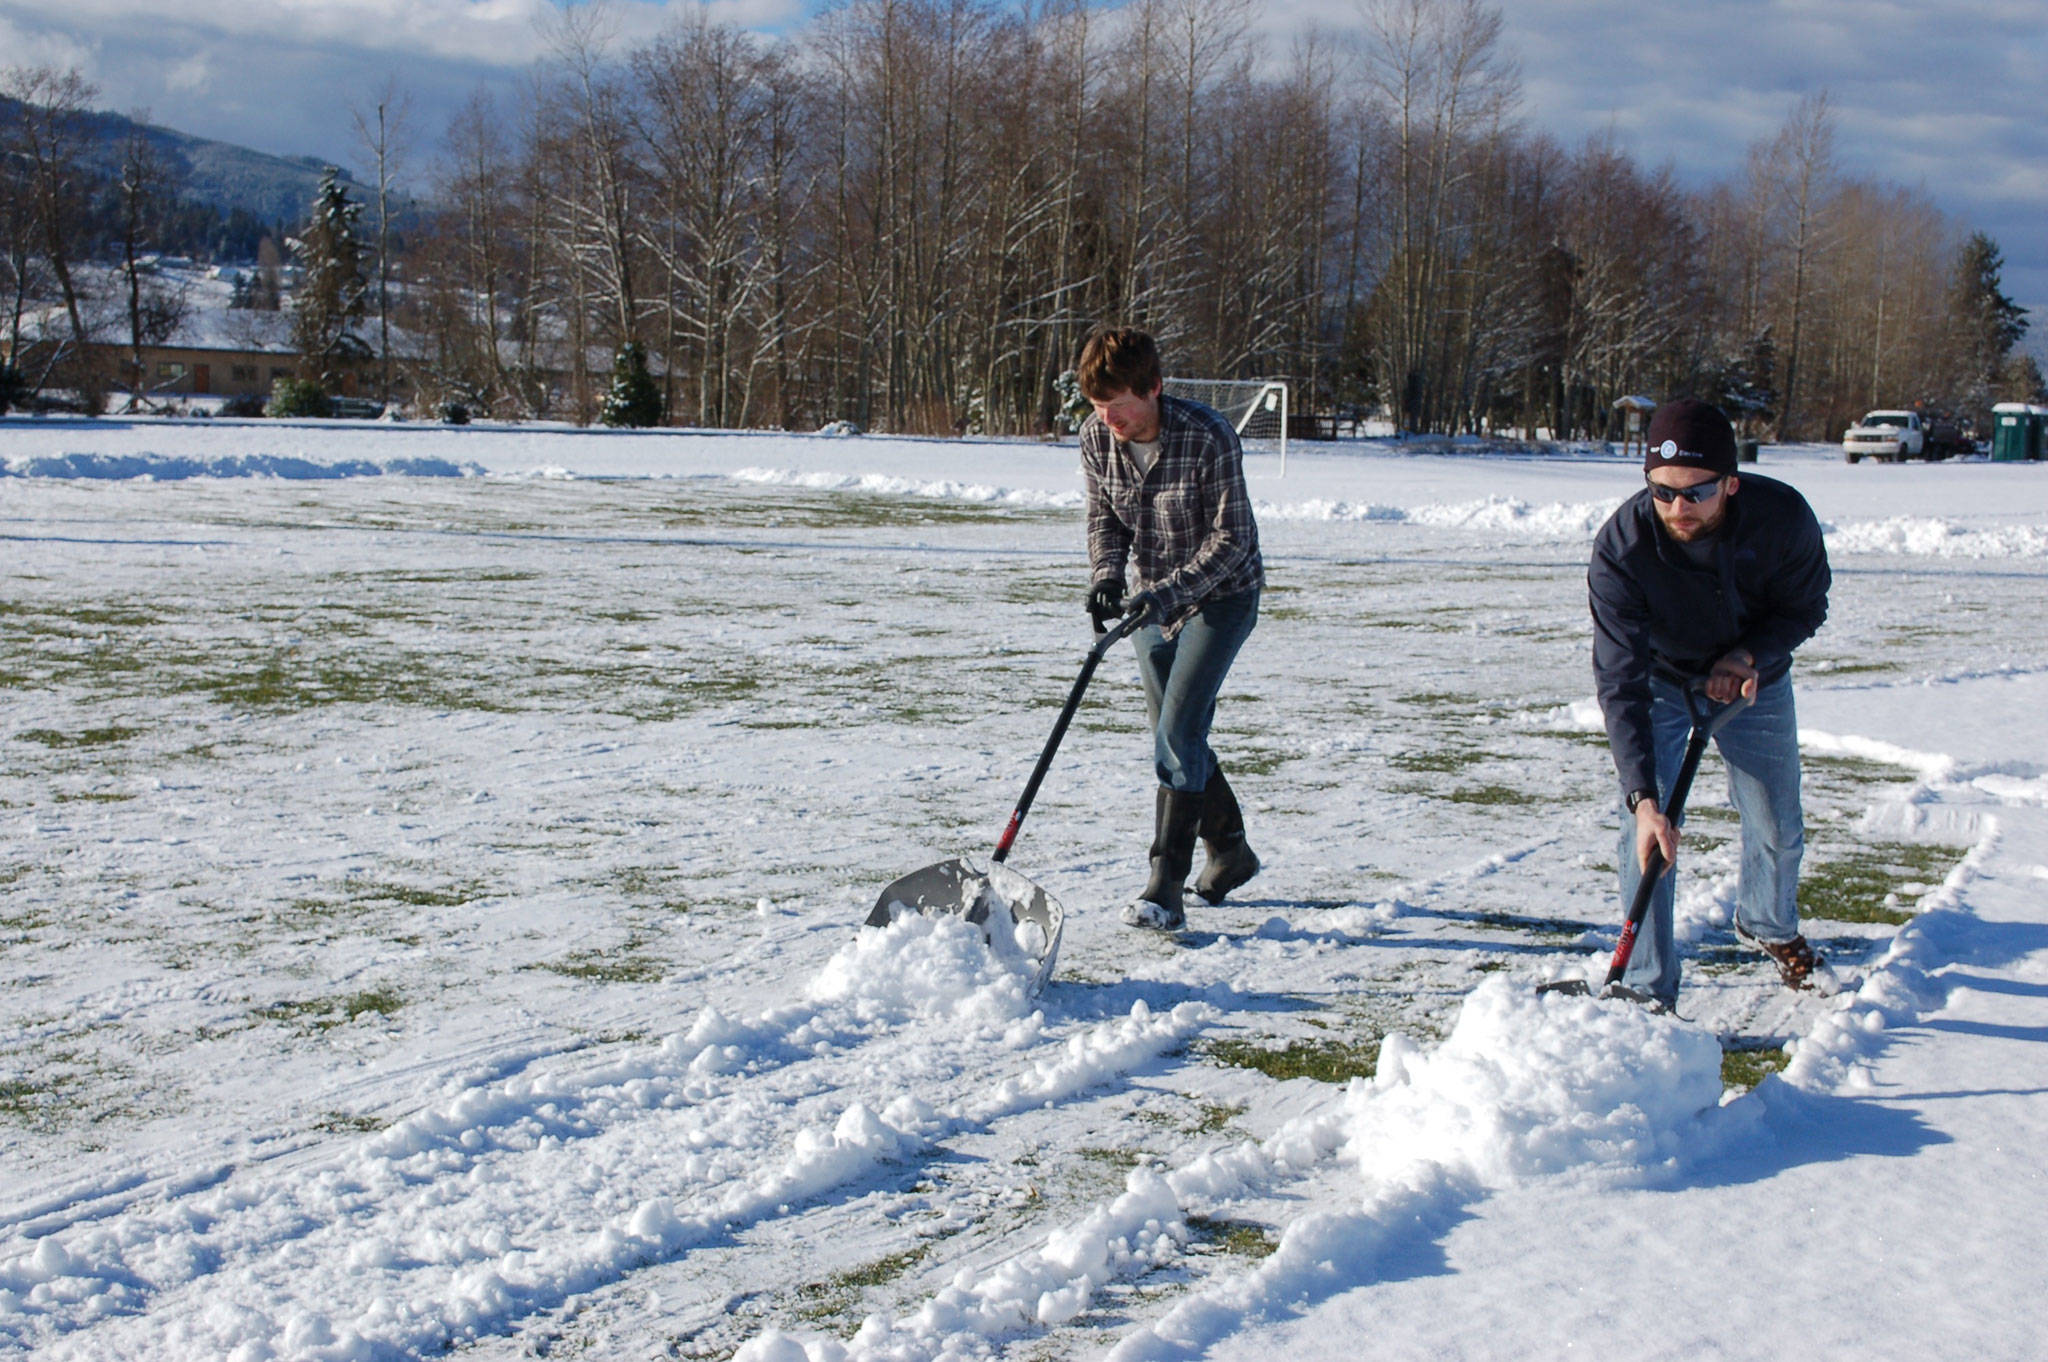 Employee of Meyer Electric, Taylor McCormack, left, and Meyer Electric owner and president of Storm King Soccer Club Kyle Kautzman, shovel snow on Feb. 22 at the Albert Haller Playfields at Carrie Blake Park so the Storm King Soccer Club’s Boys U10 team can practice for their game on Feb. 24. Sequim Gazette photo by Erin Hawkins